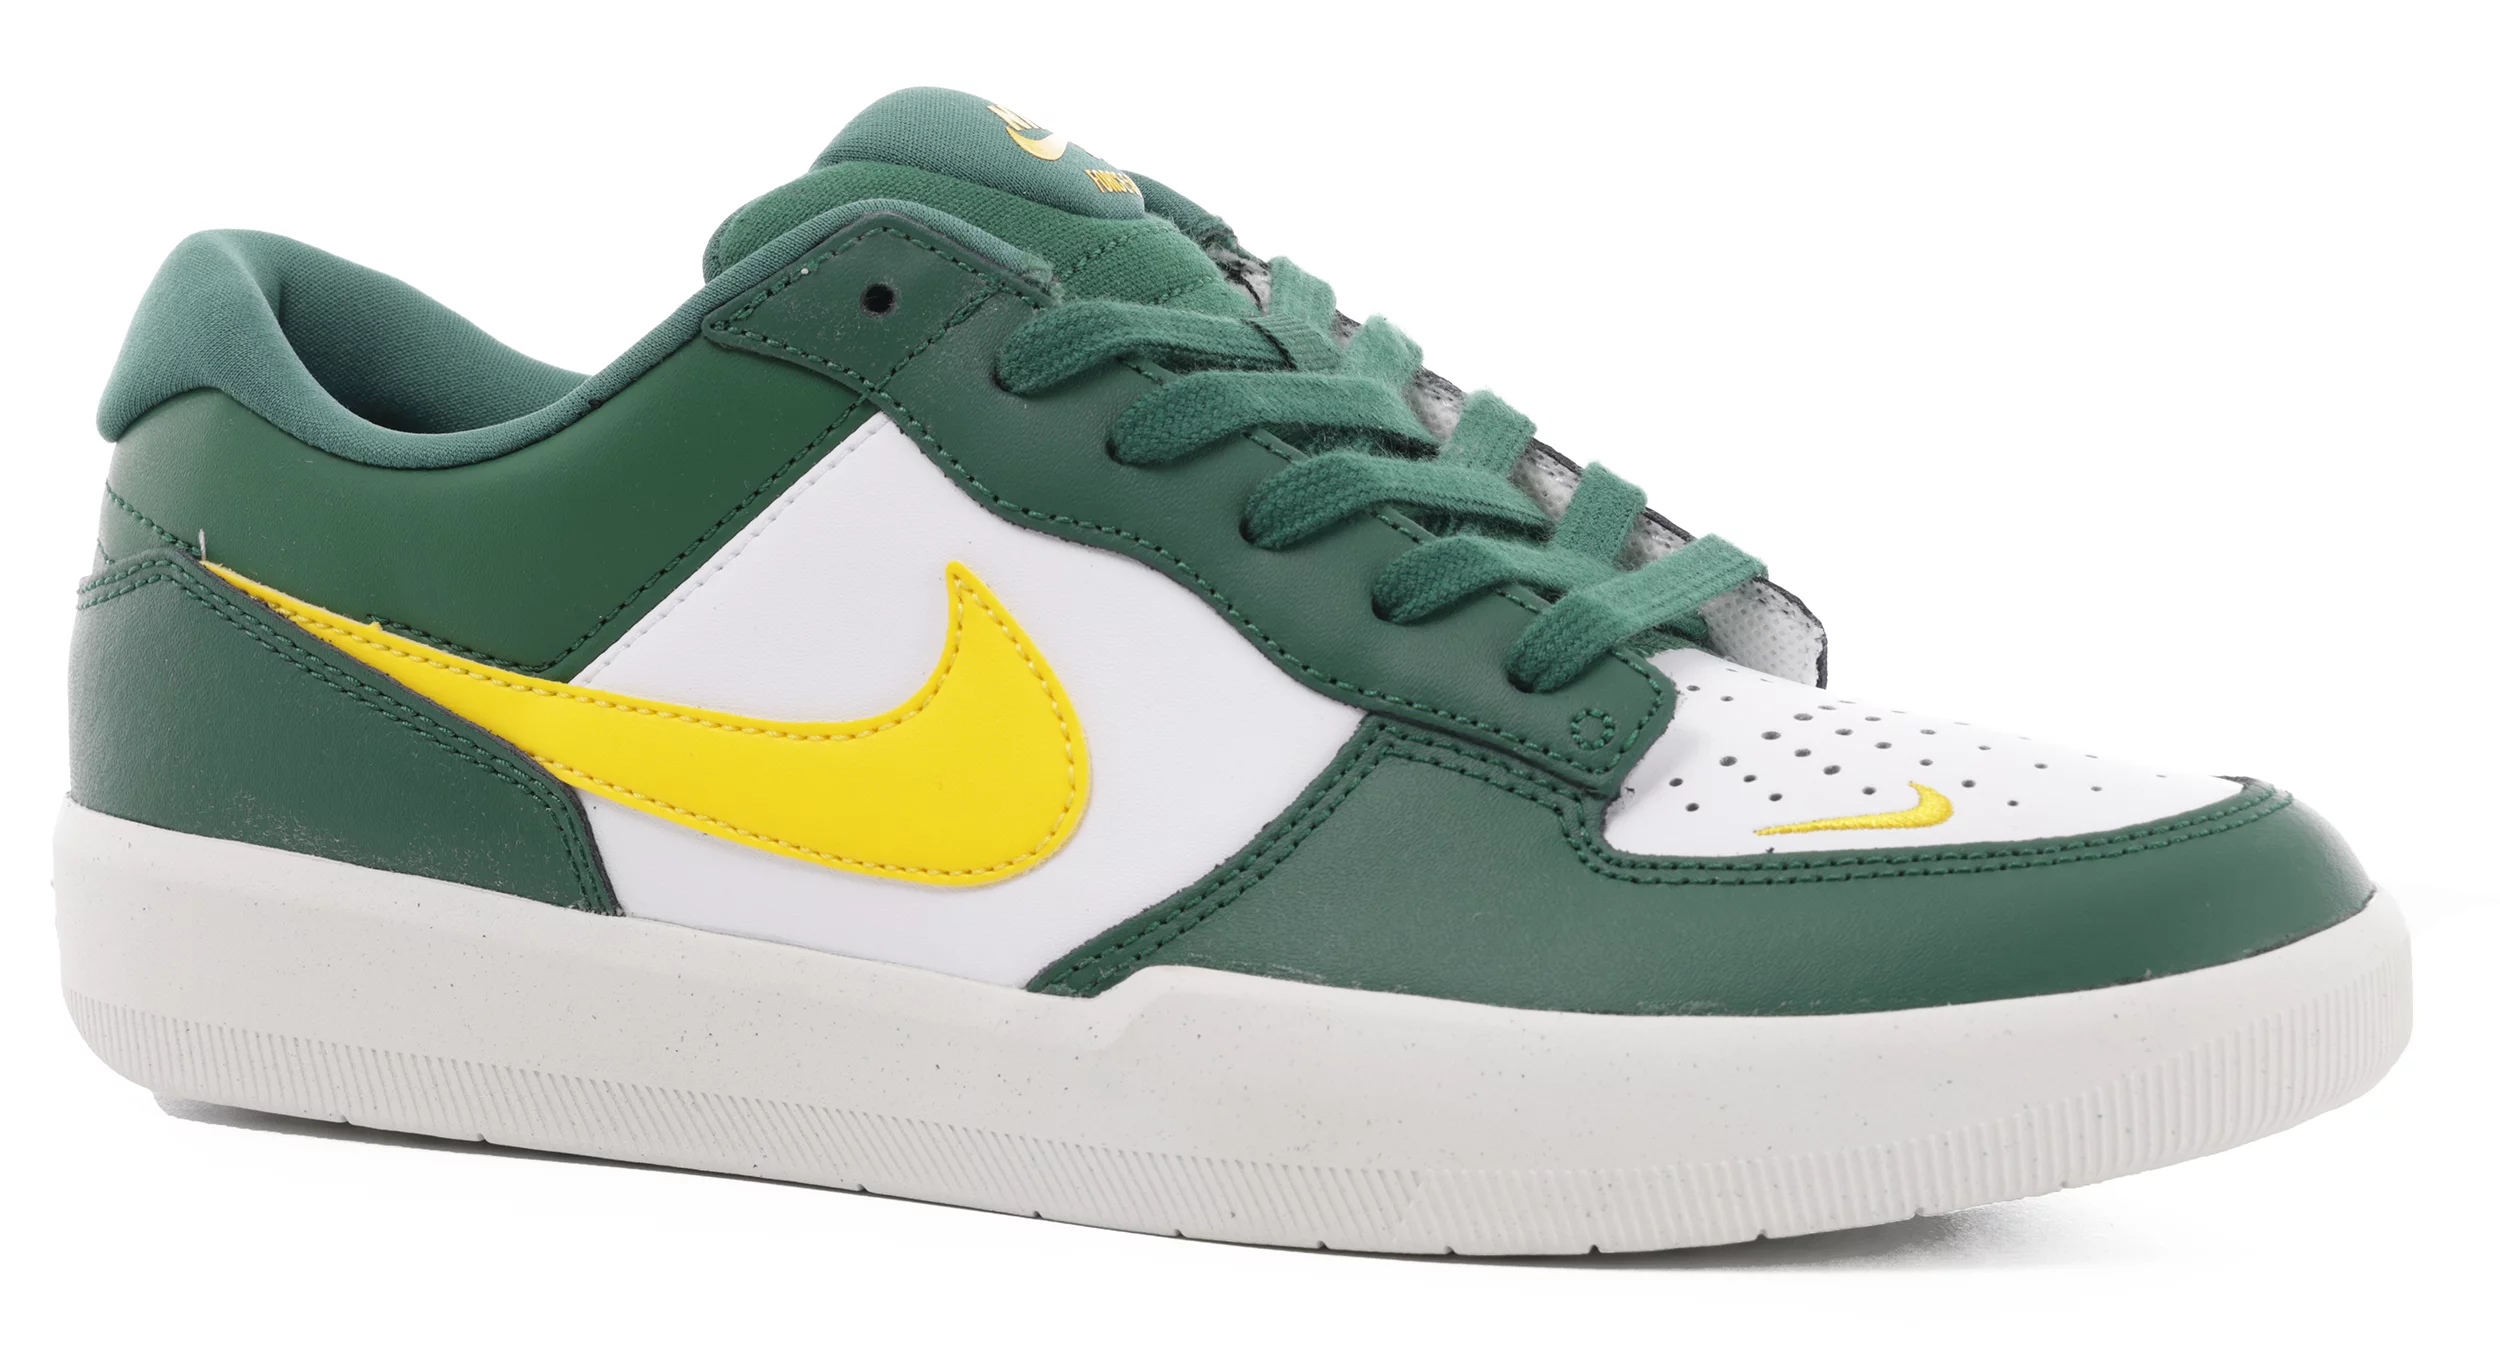 Chemie Buitenshuis heerser Nike SB Force 58 PRM L Skate Shoes - gorge green/tour yellow-white - Free  Shipping | Tactics